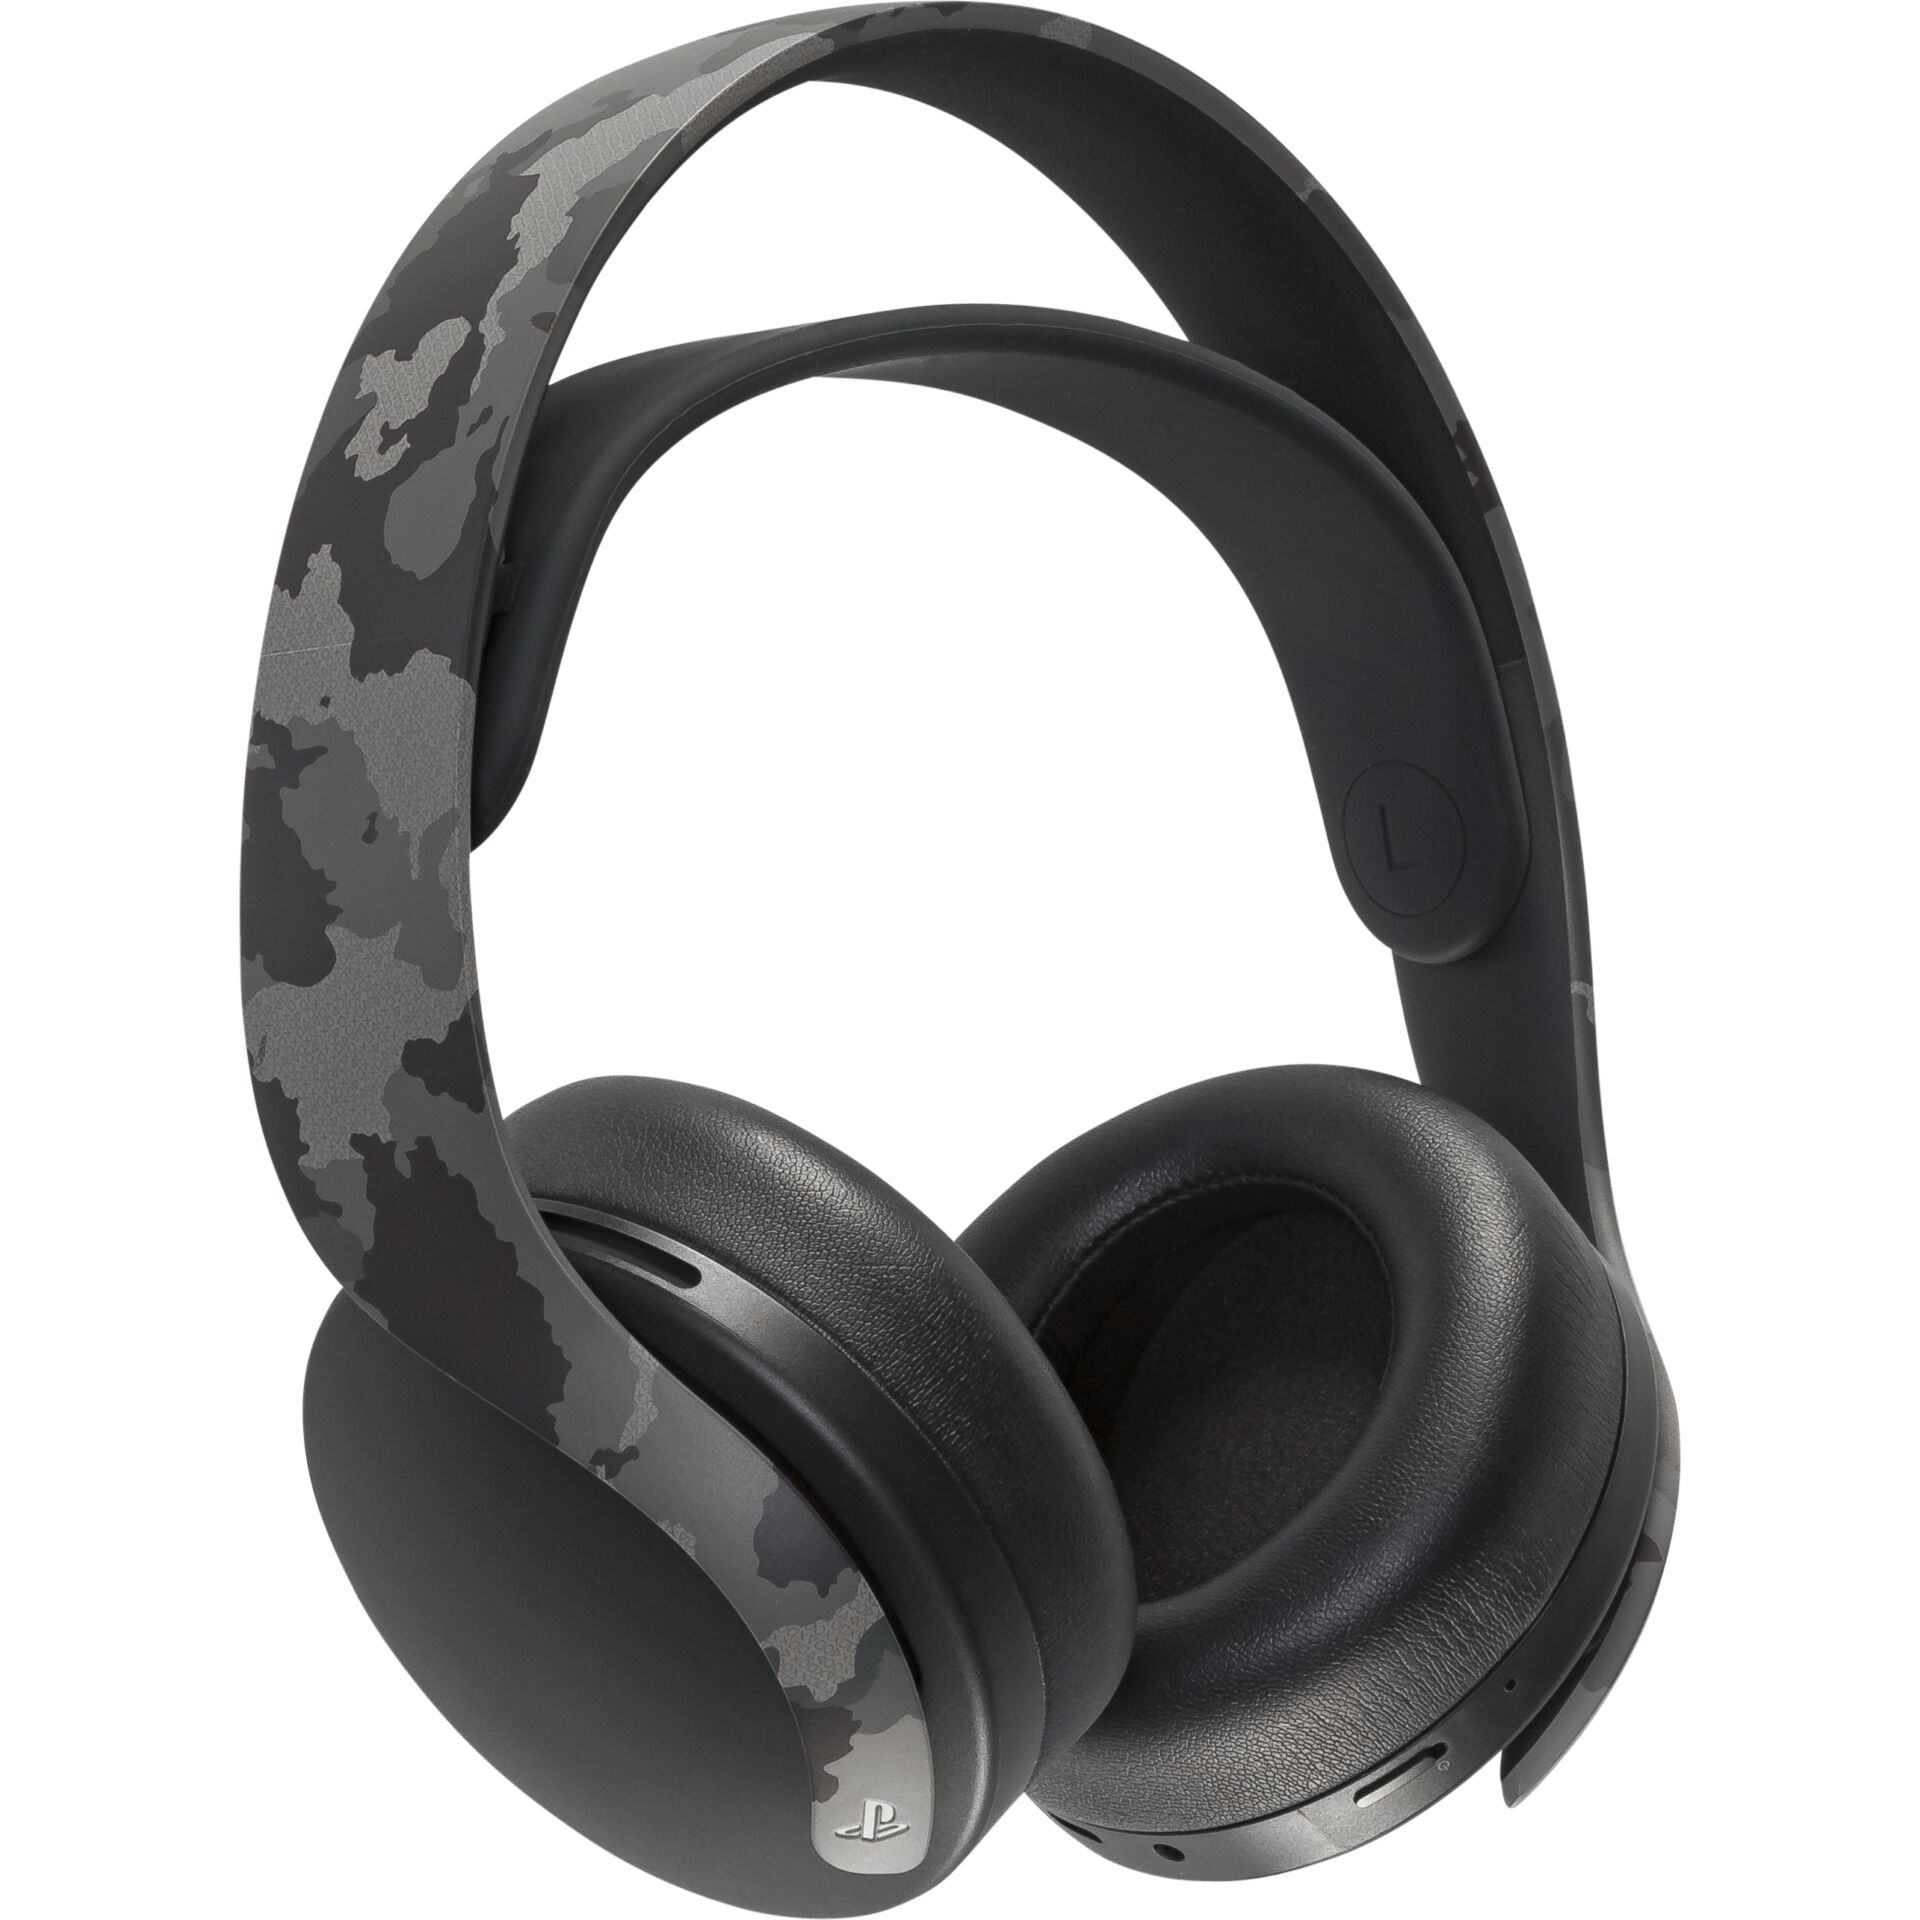 Sony PULSE 3D Headset Wired & Wireless Head-band Gaming USB Type-C Camouflage, Grey